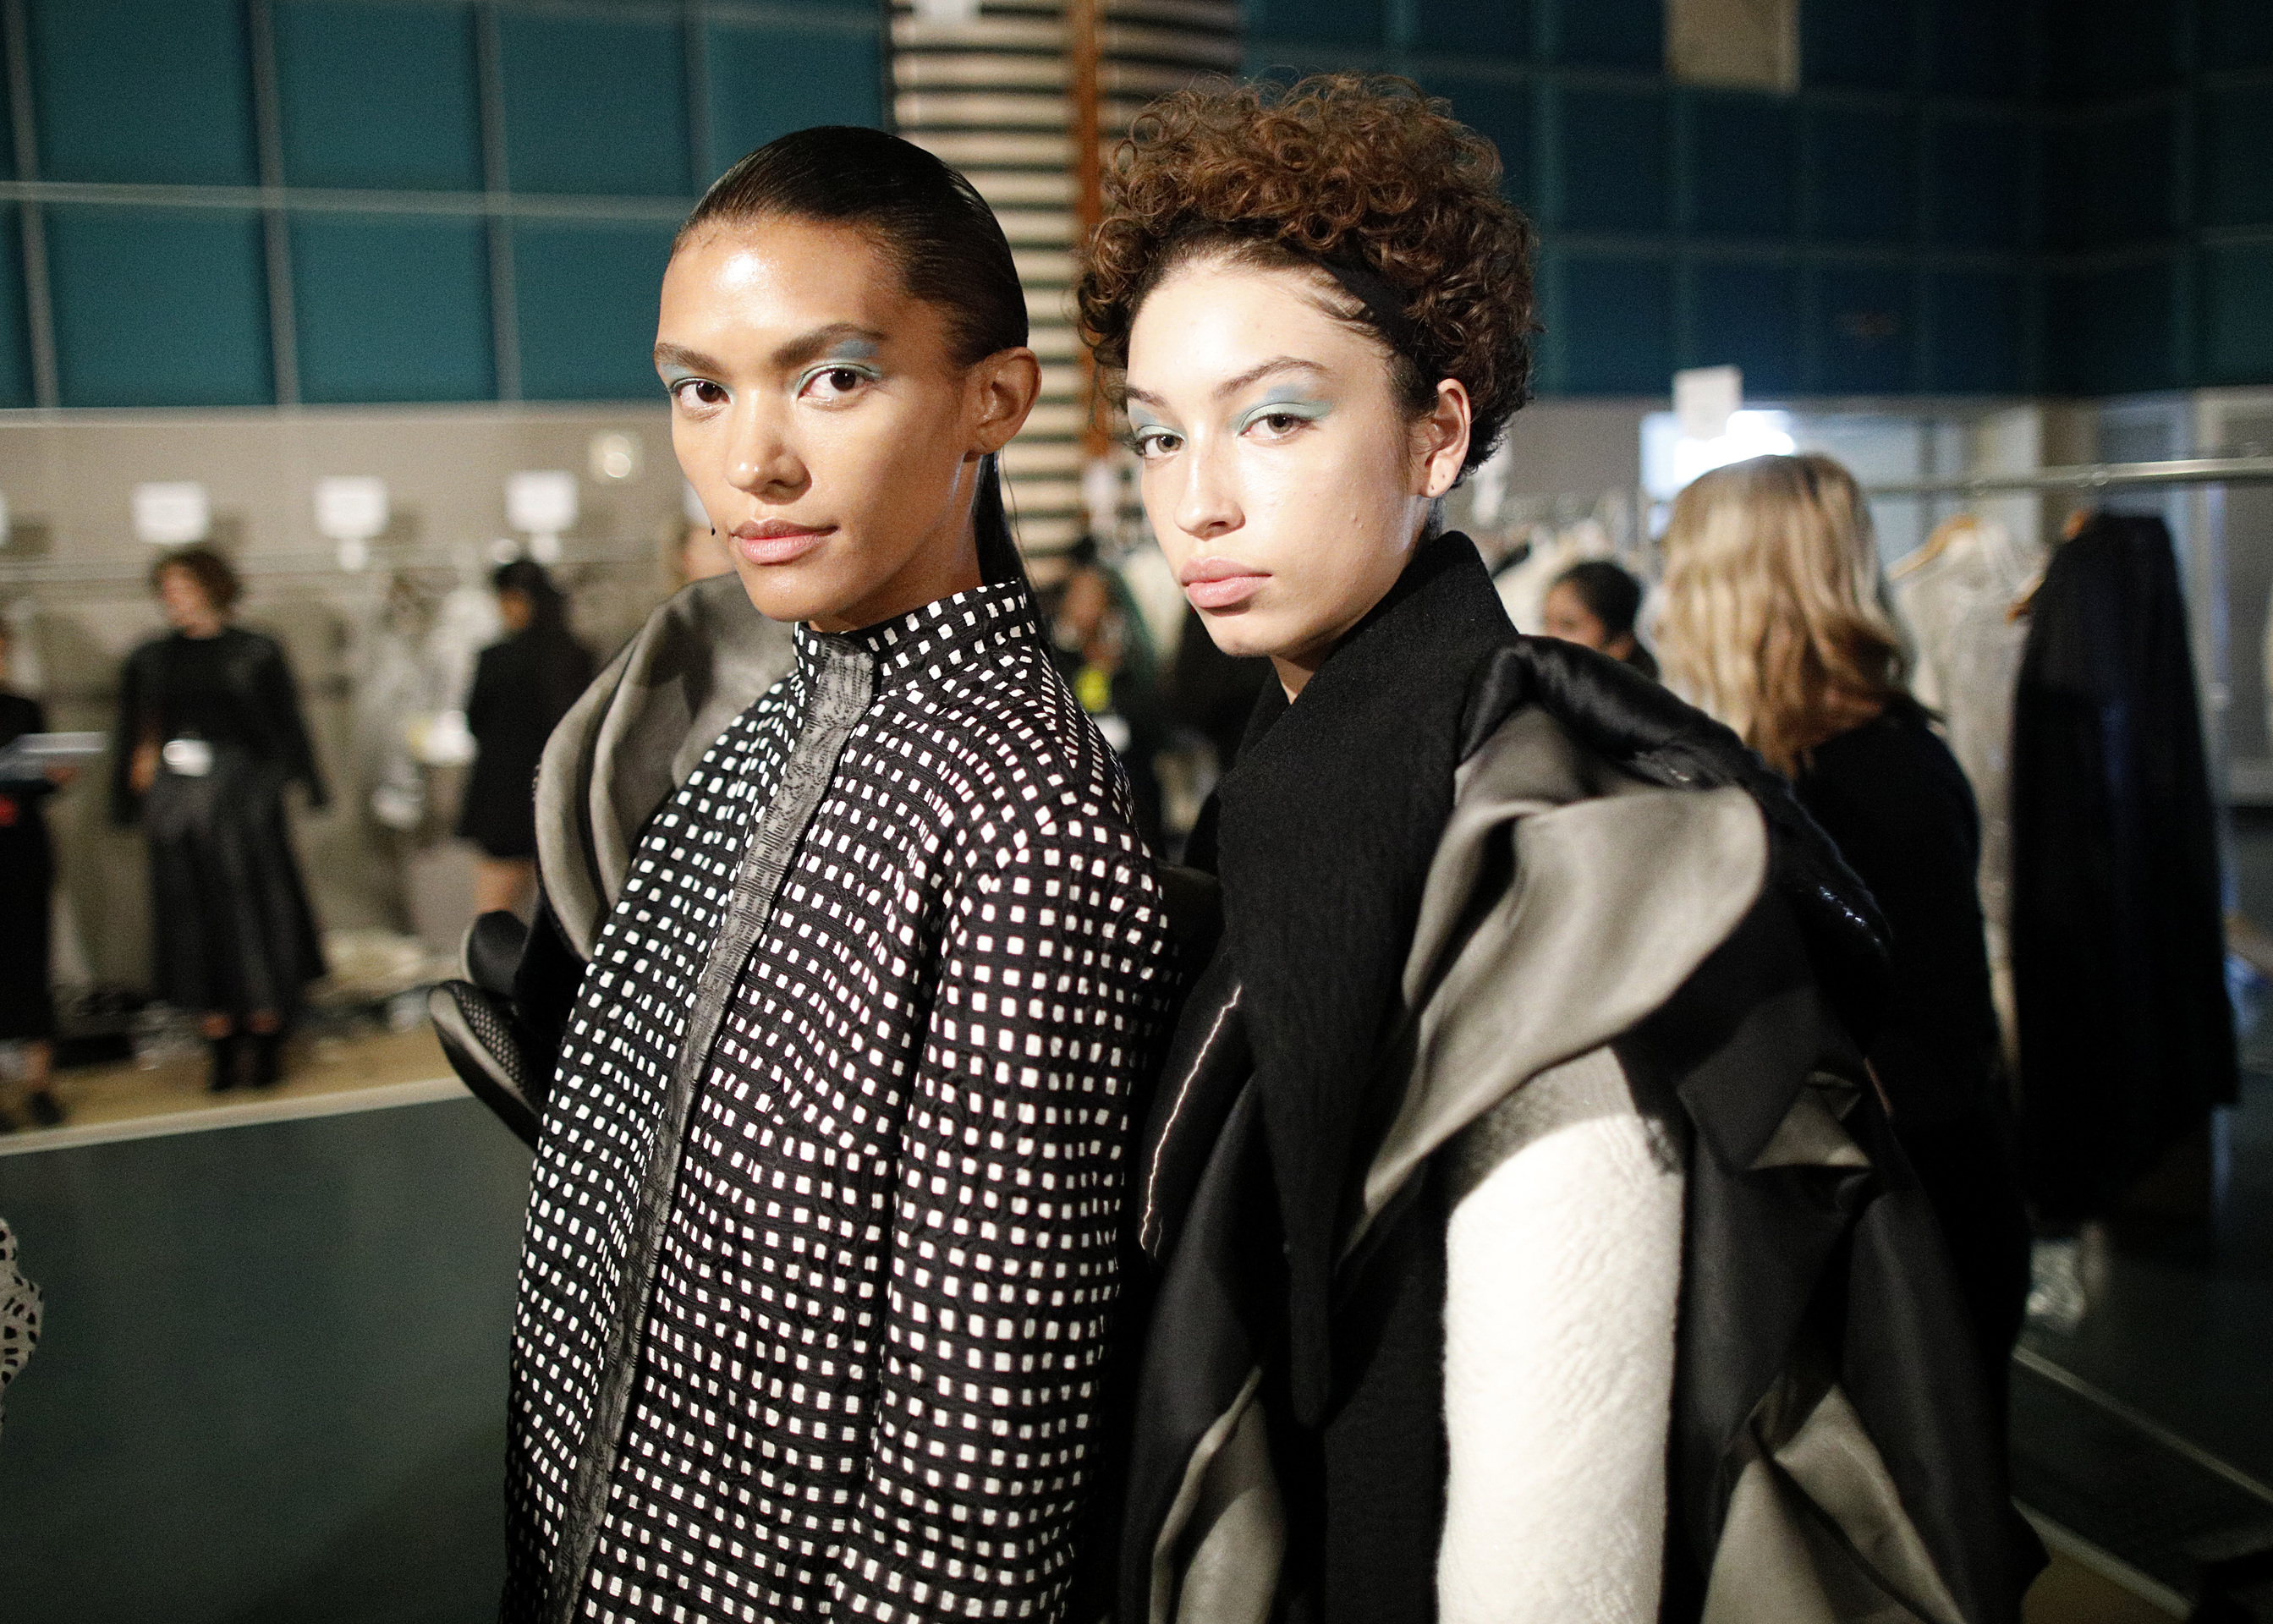 Two models wearing collections by Academy Fashion students gaze at camera